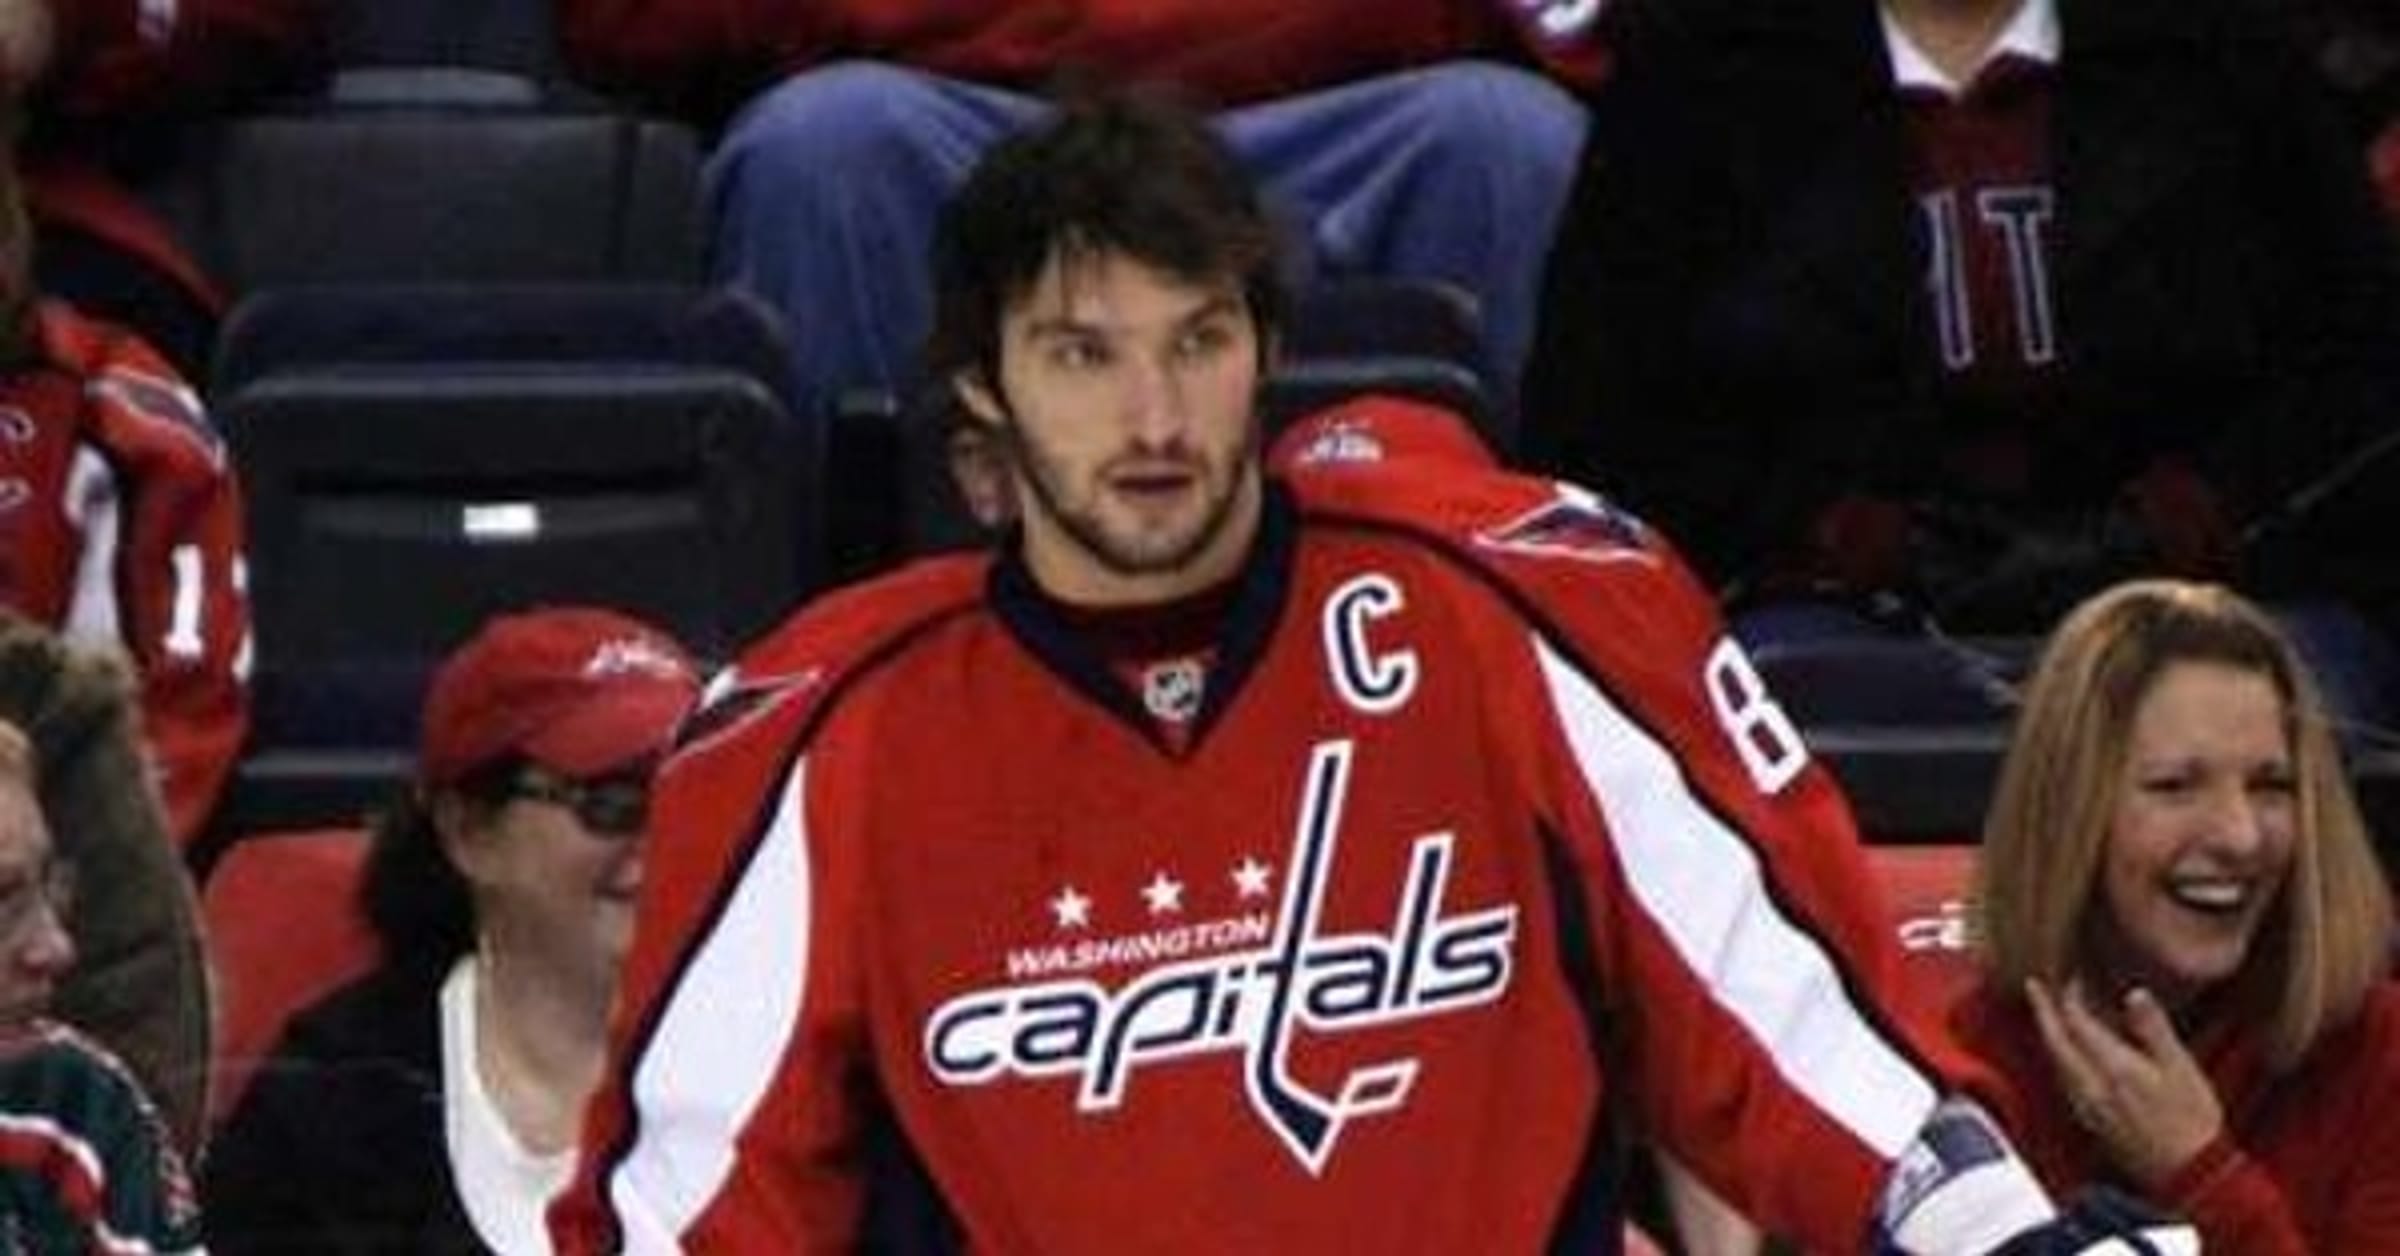 Reader's Poll: Which is the Best Capitals Uniform of All-Time?